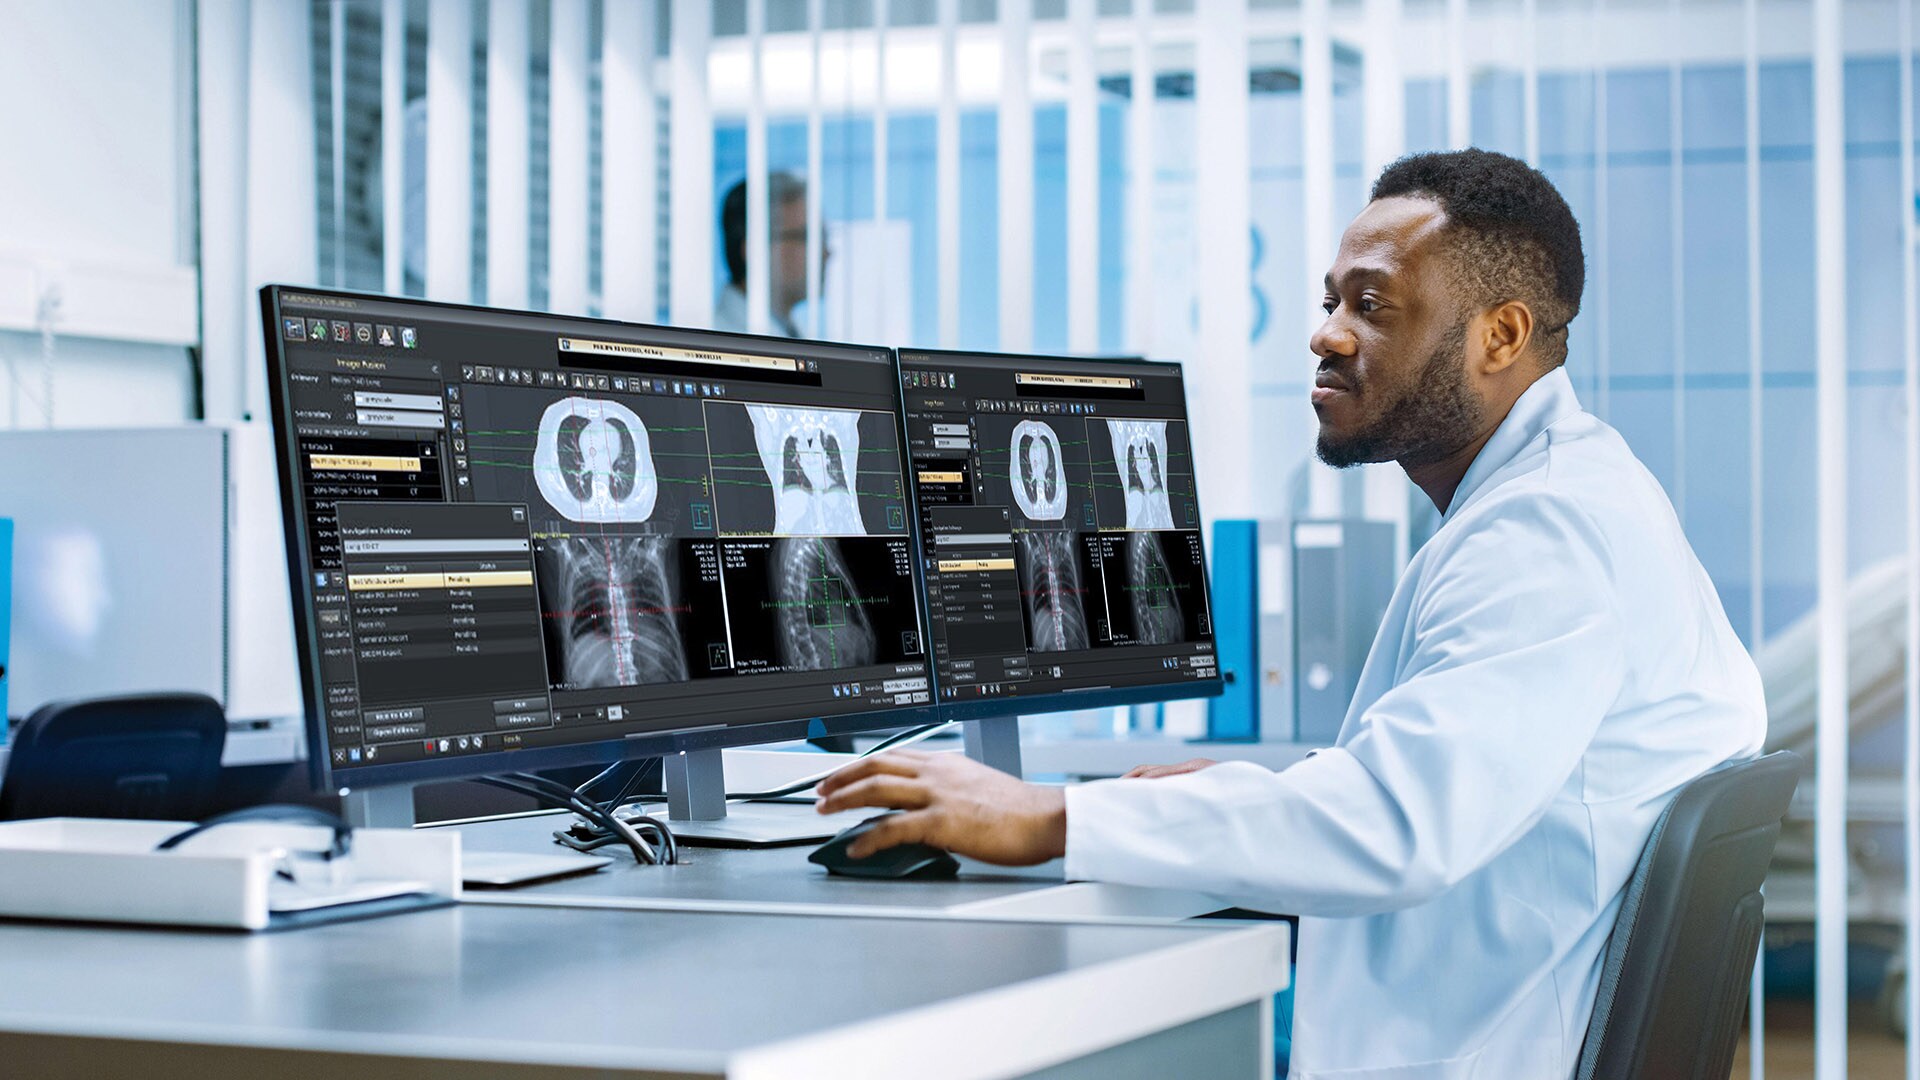 Philips brings clarity to every moment of cancer care with new patient-centered innovations at ASTRO 2021